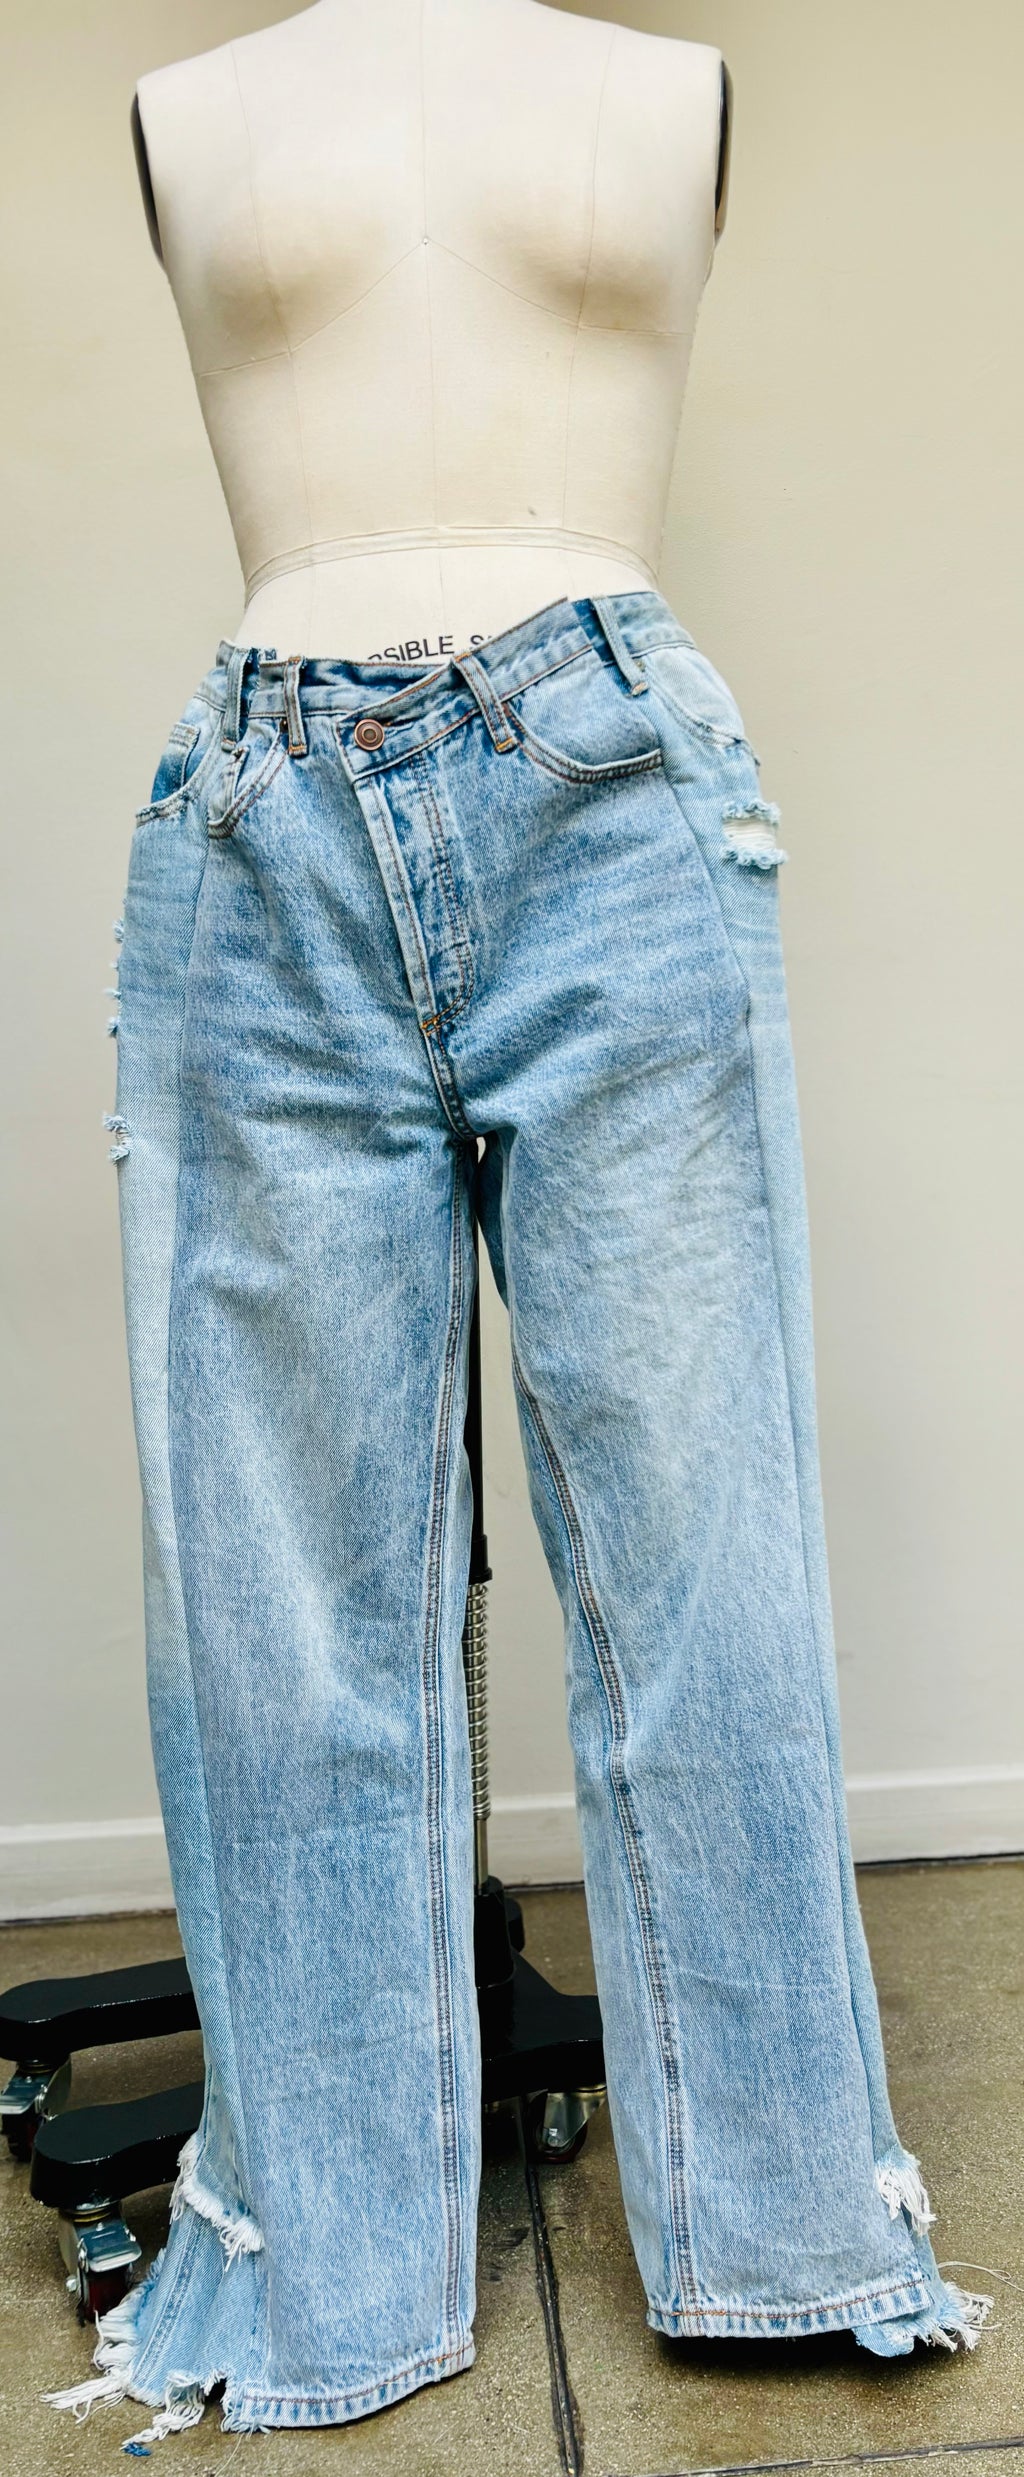 For the Miners Jeans